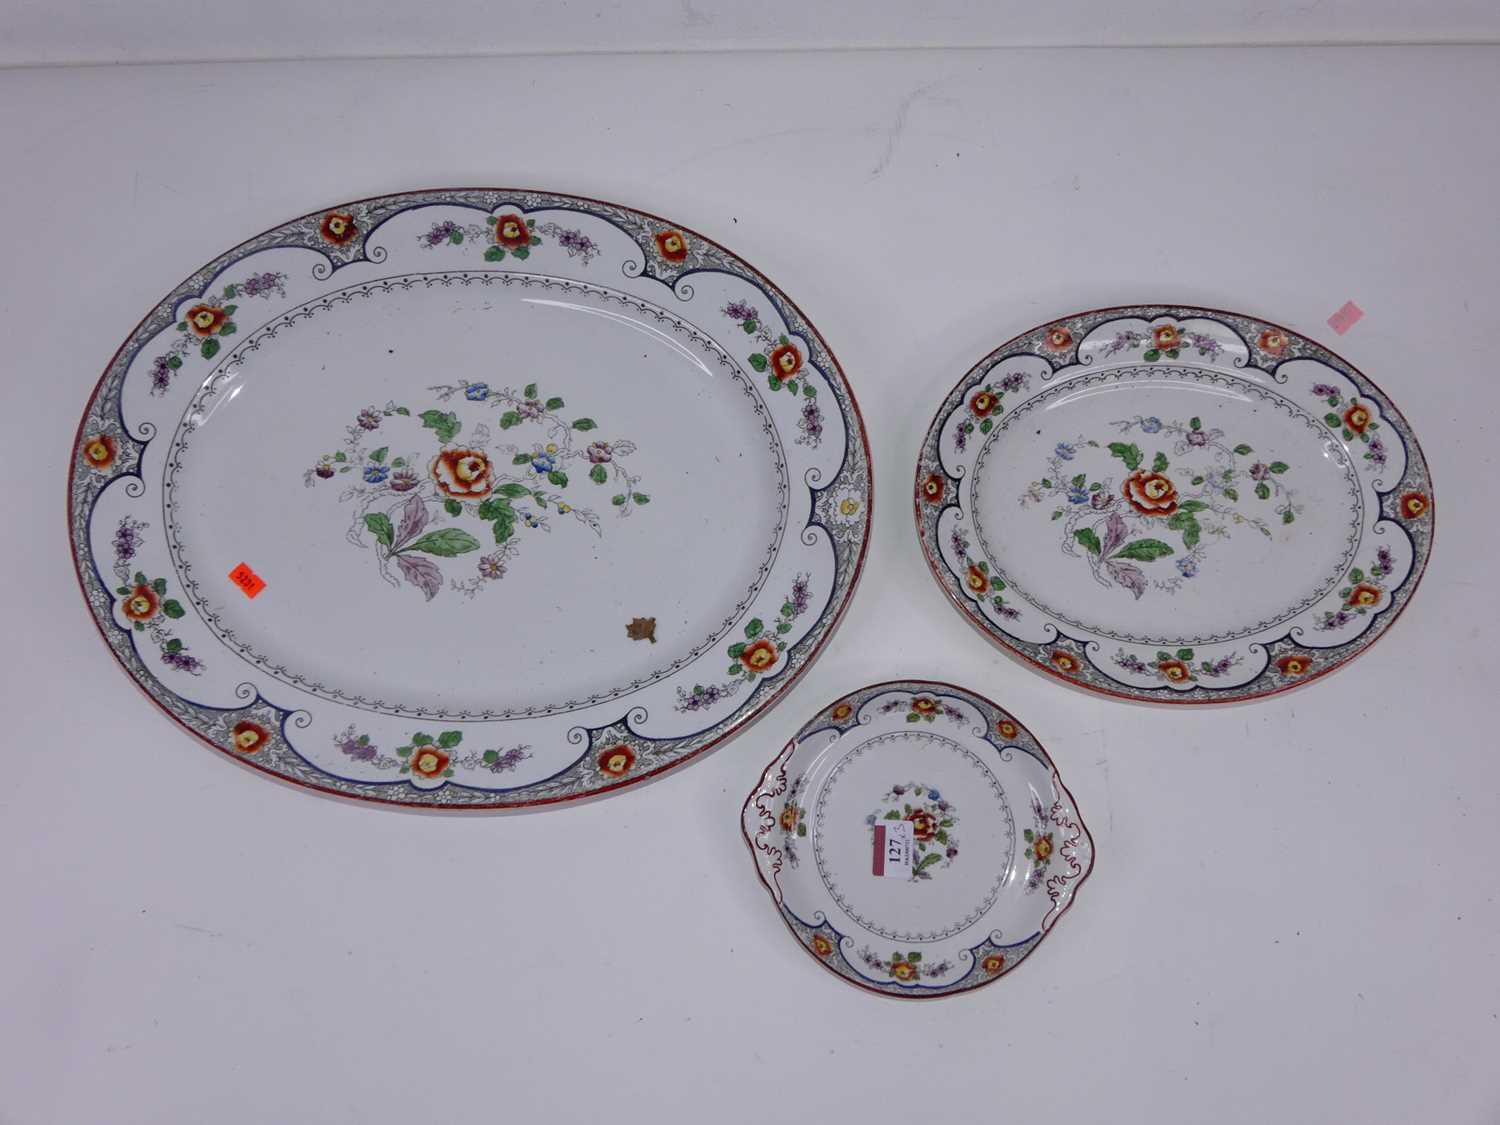 A large Victorian S Hancock & Sons Coronaware oval meat dish, transfer printed with flowers,